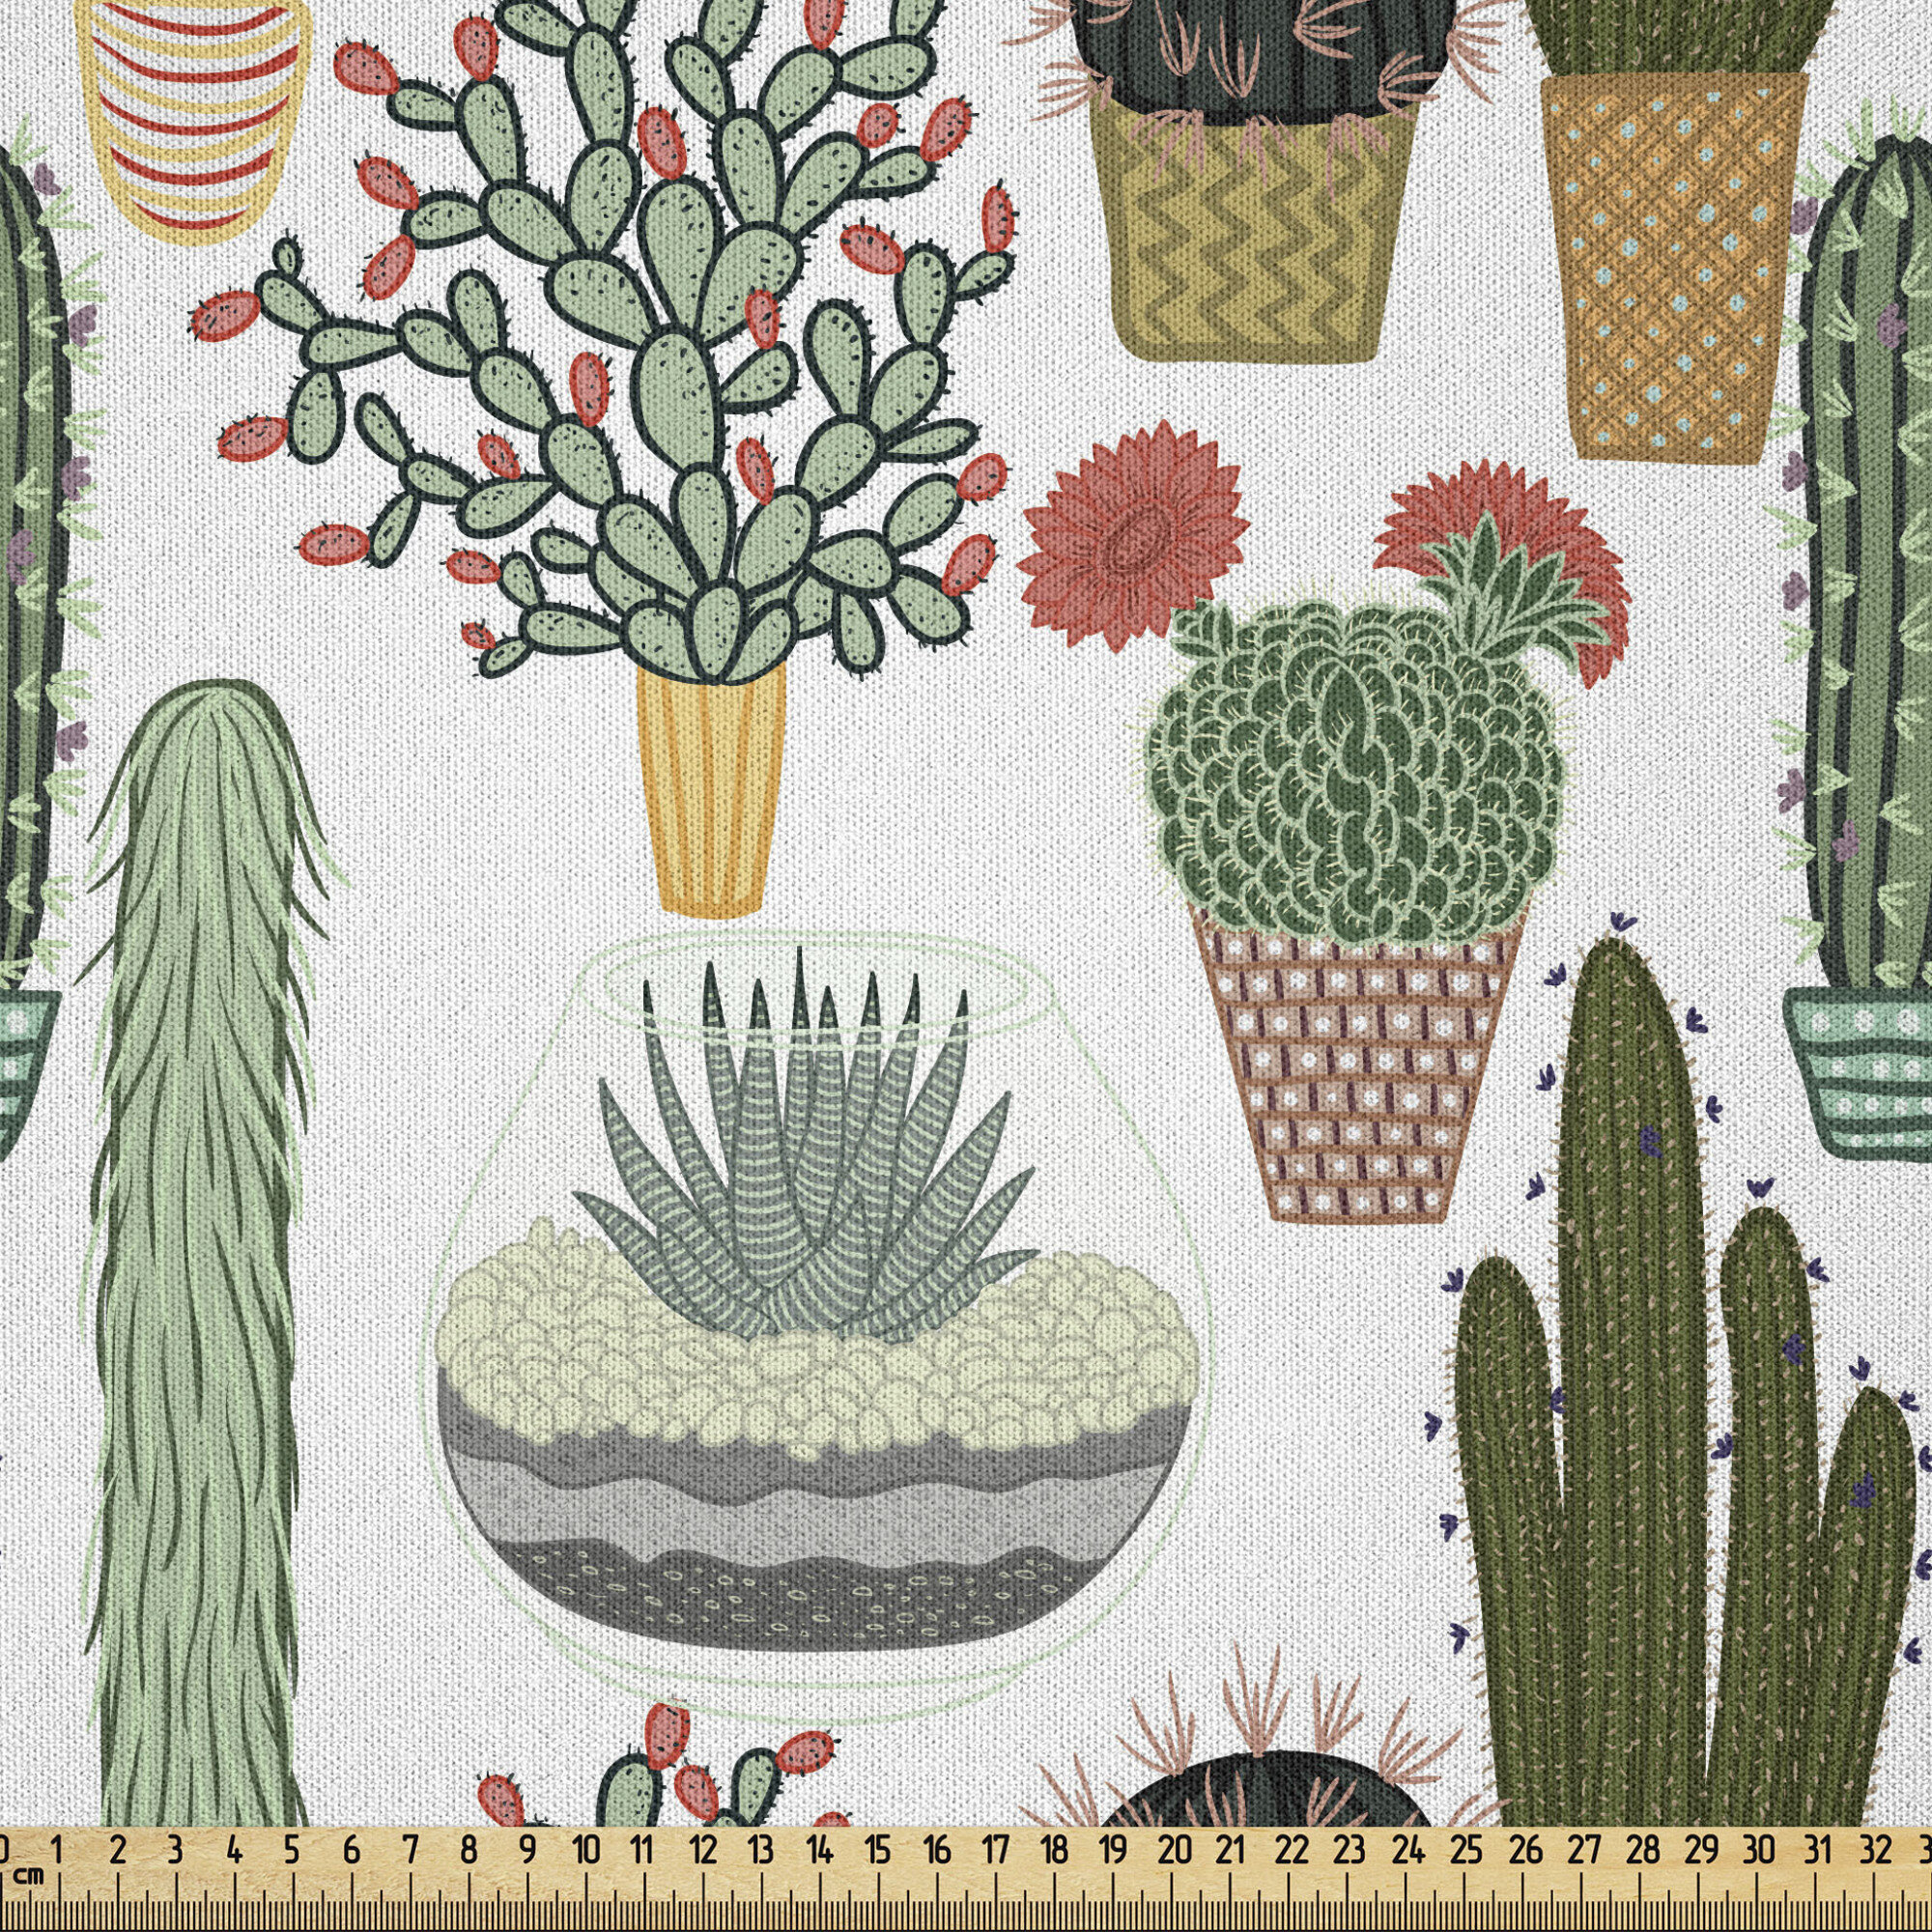  Cotton Fabric Cactus Fabric by The Yard 110cm Wide SY